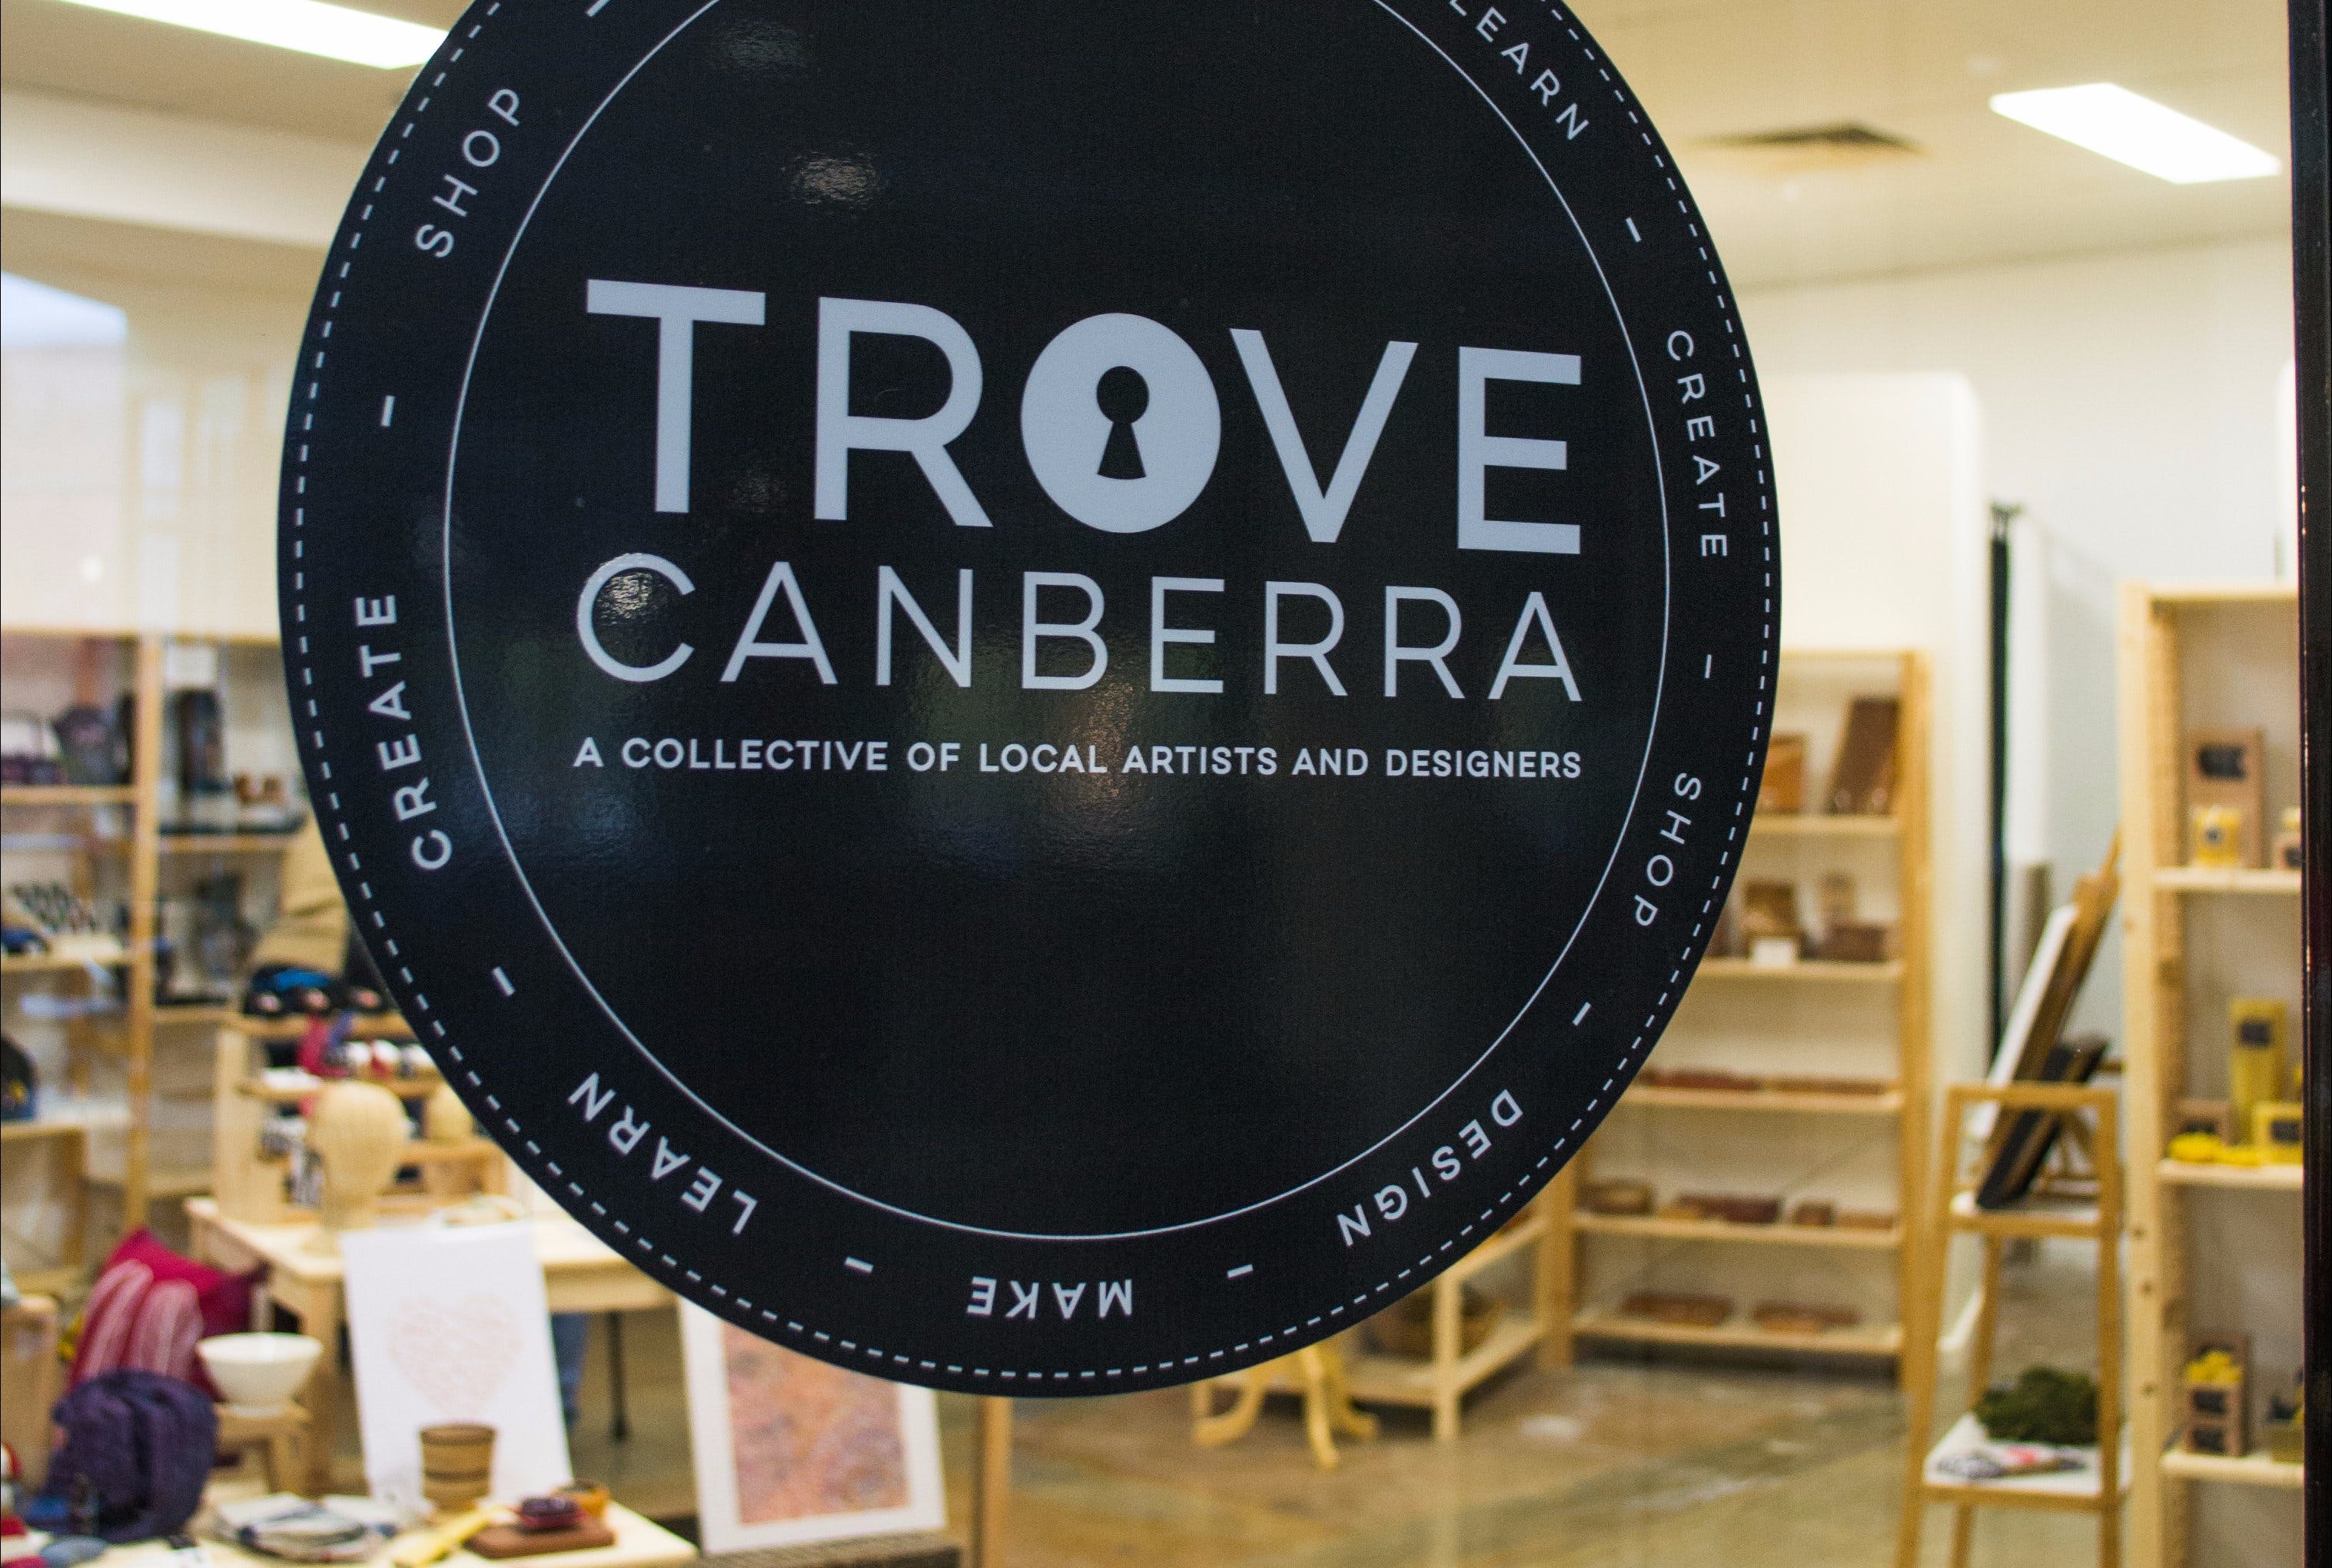 Trove Canberra - Find Attractions